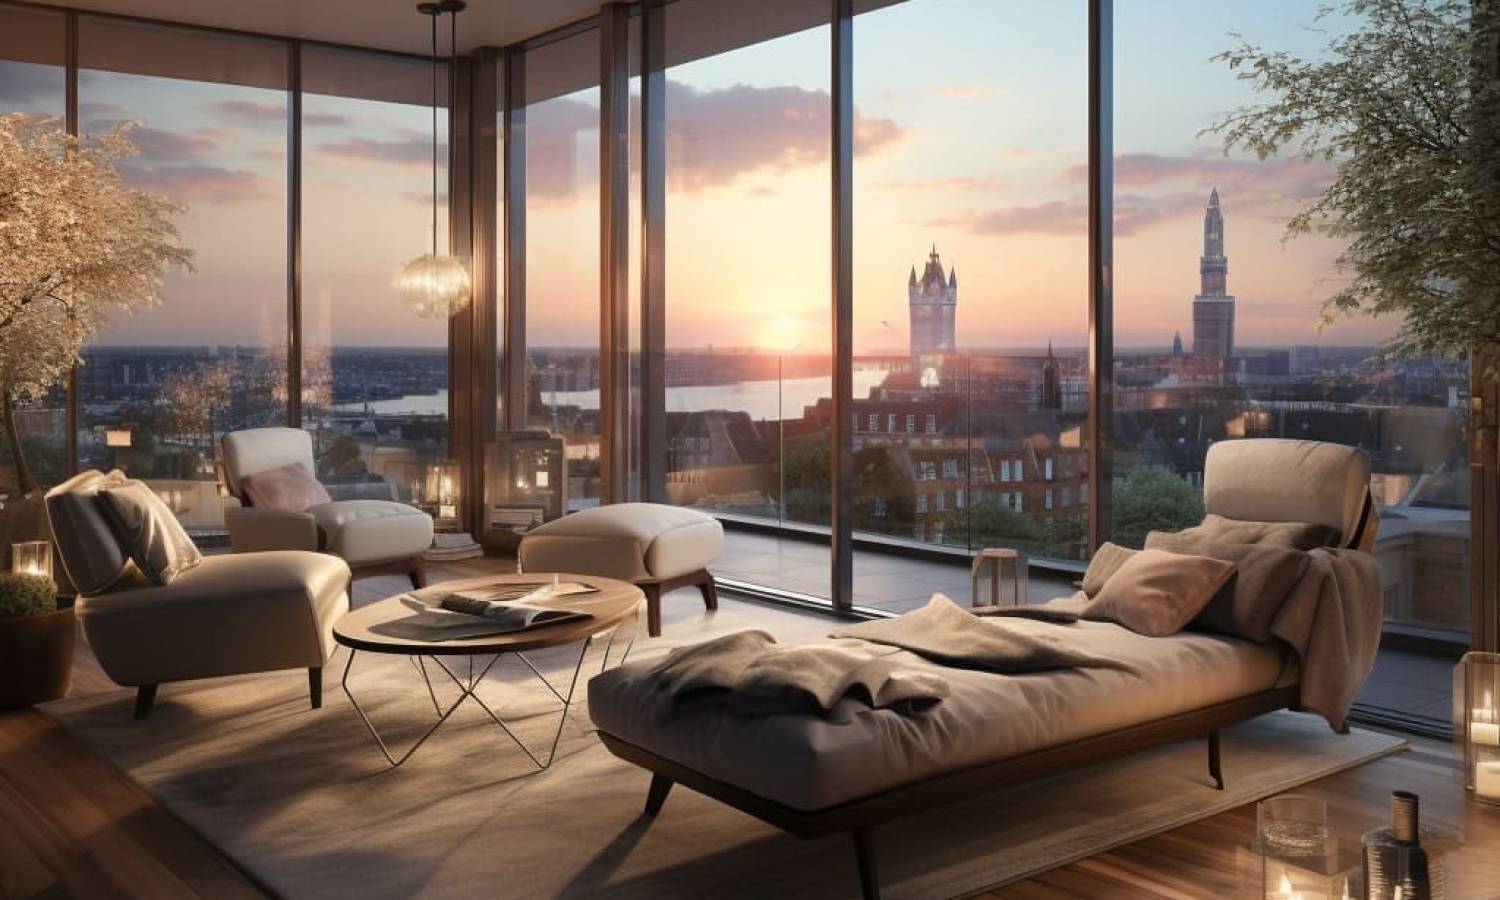 London's Luxury Real Estate Prices Retreat to Early 2014 Valuations